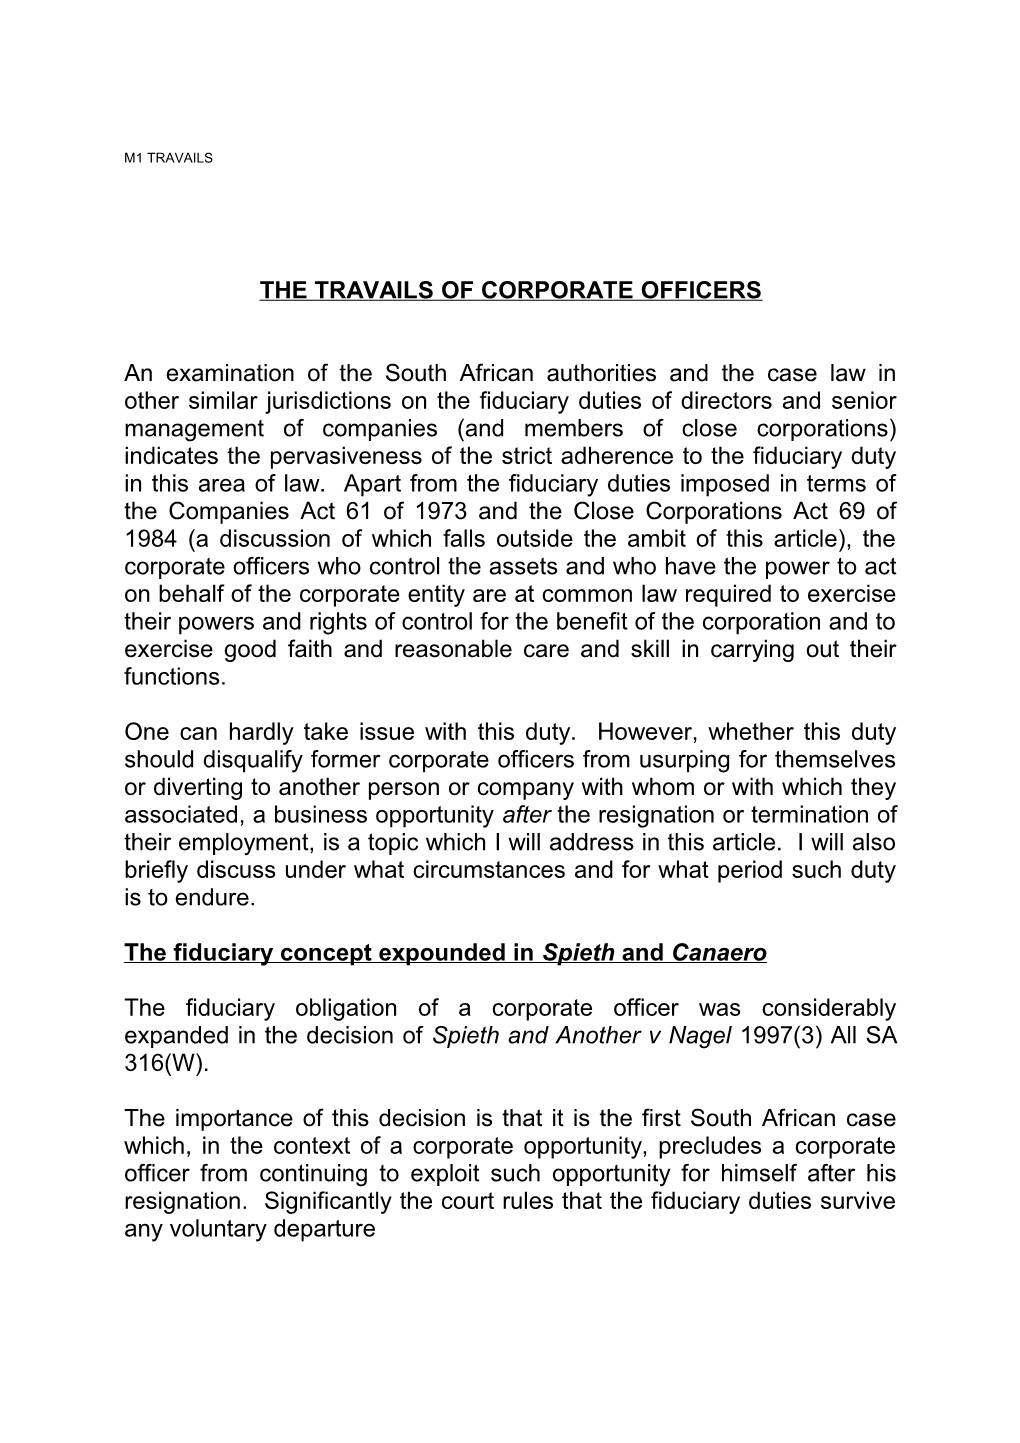 The Travails of Corporate Officers